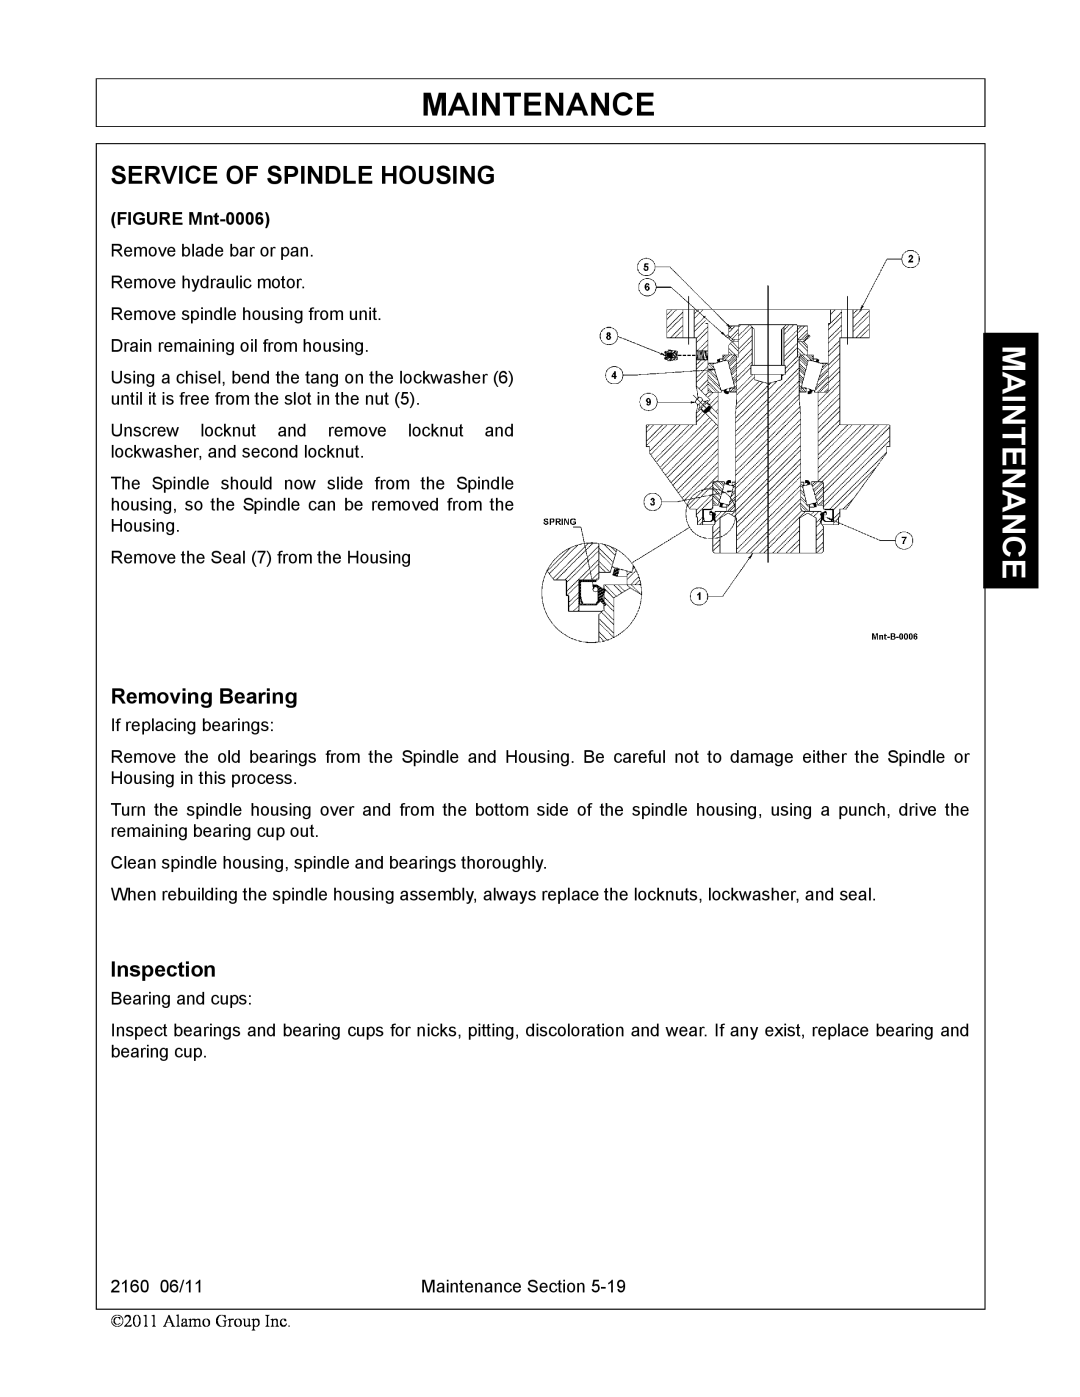 Servis-Rhino 2160 manual Service Of Spindle Housing, Maintenance, Removing Bearing, Inspection, FIGURE Mnt-0006 